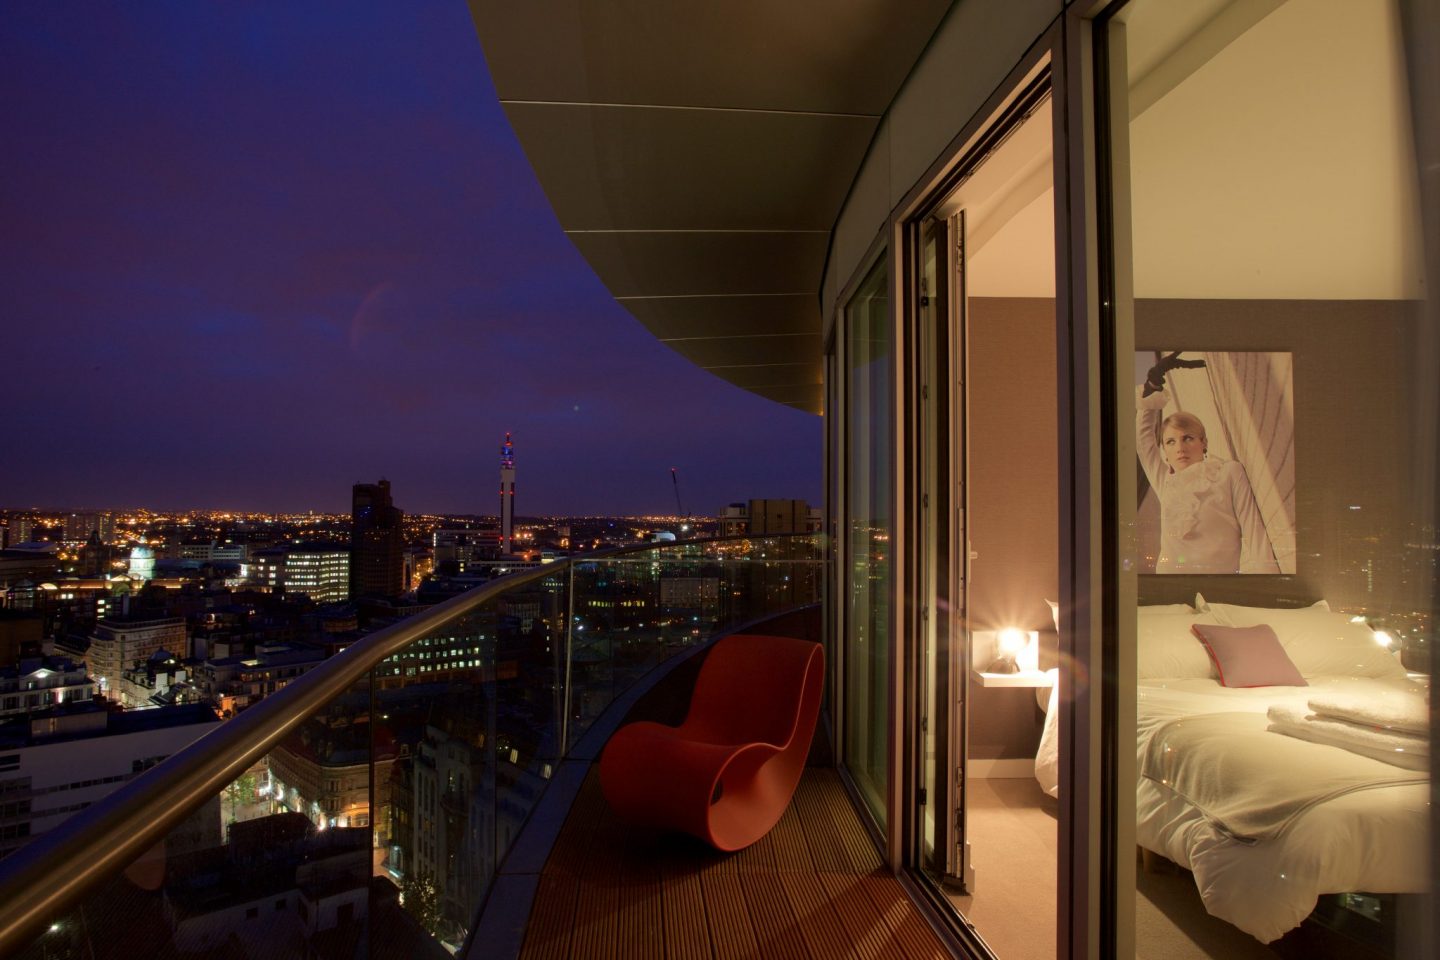 Romantic nights not just for Valentine's in Birmingham at Staying Cool aparthotel. View from penthouse balcony at night and into bedroom